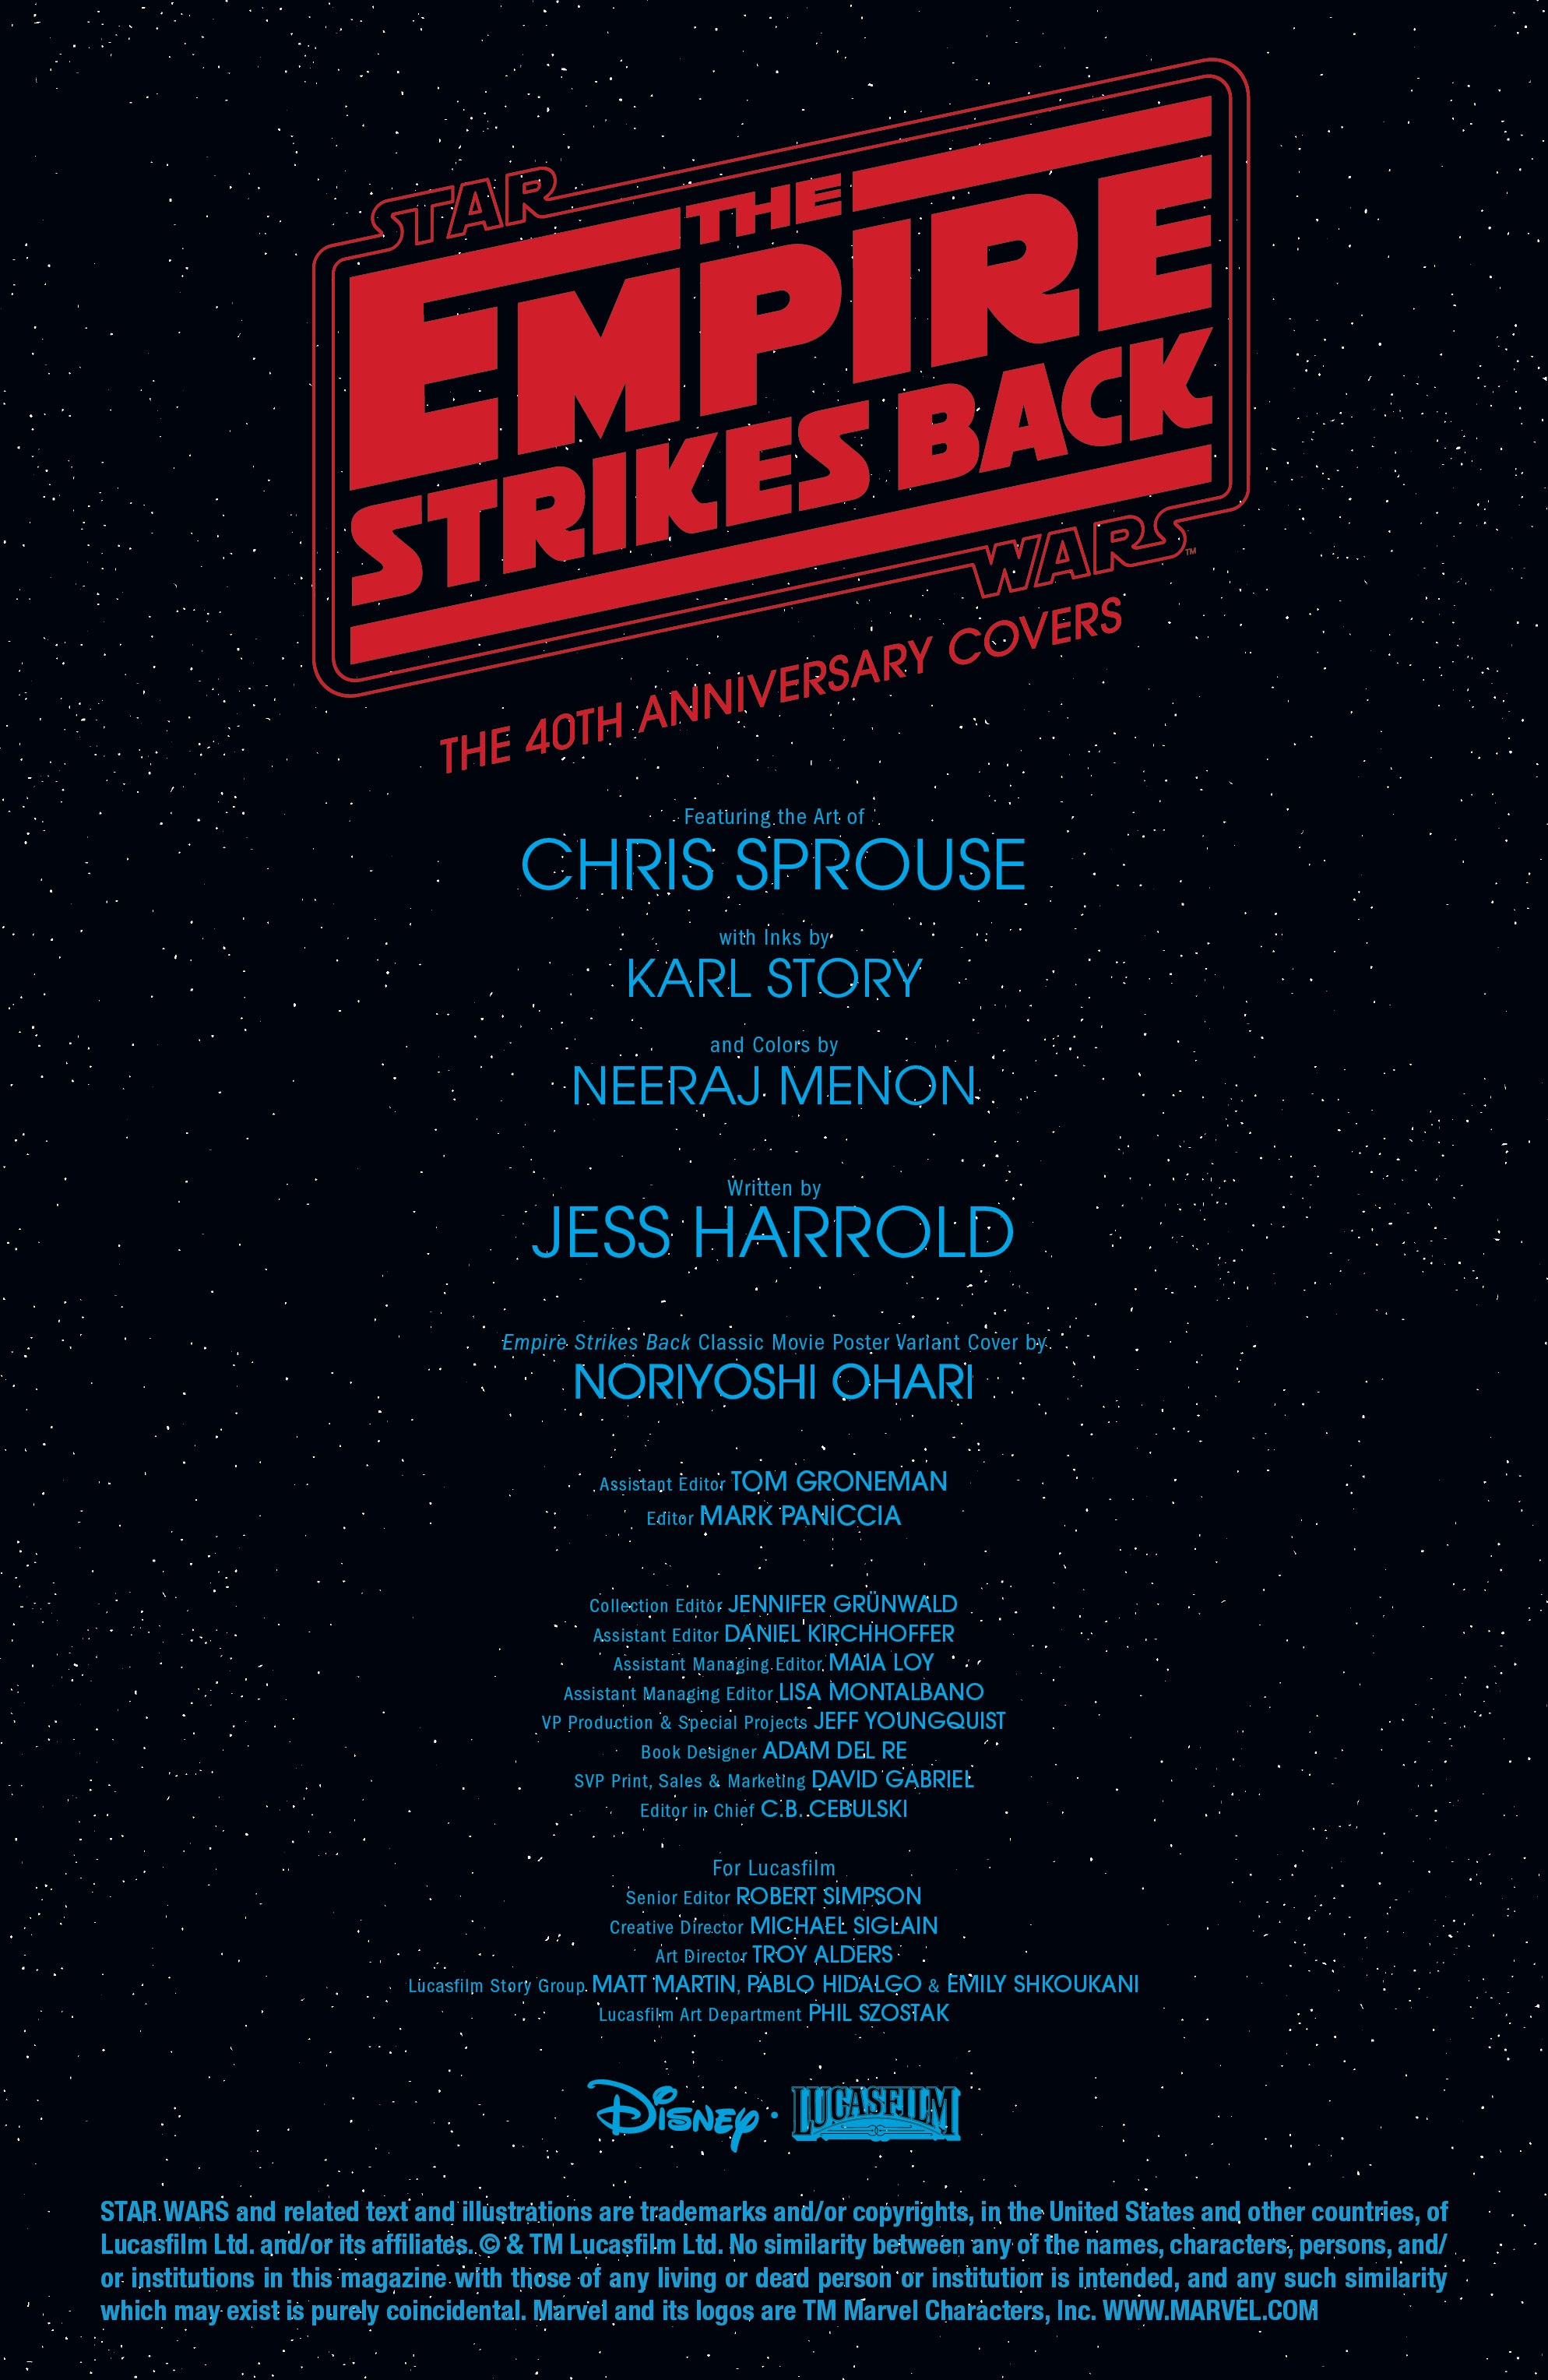 Read online Star Wars: The Empire Strikes Back - The 40th Anniversary Covers by Chris Sprouse comic -  Issue # Full - 2